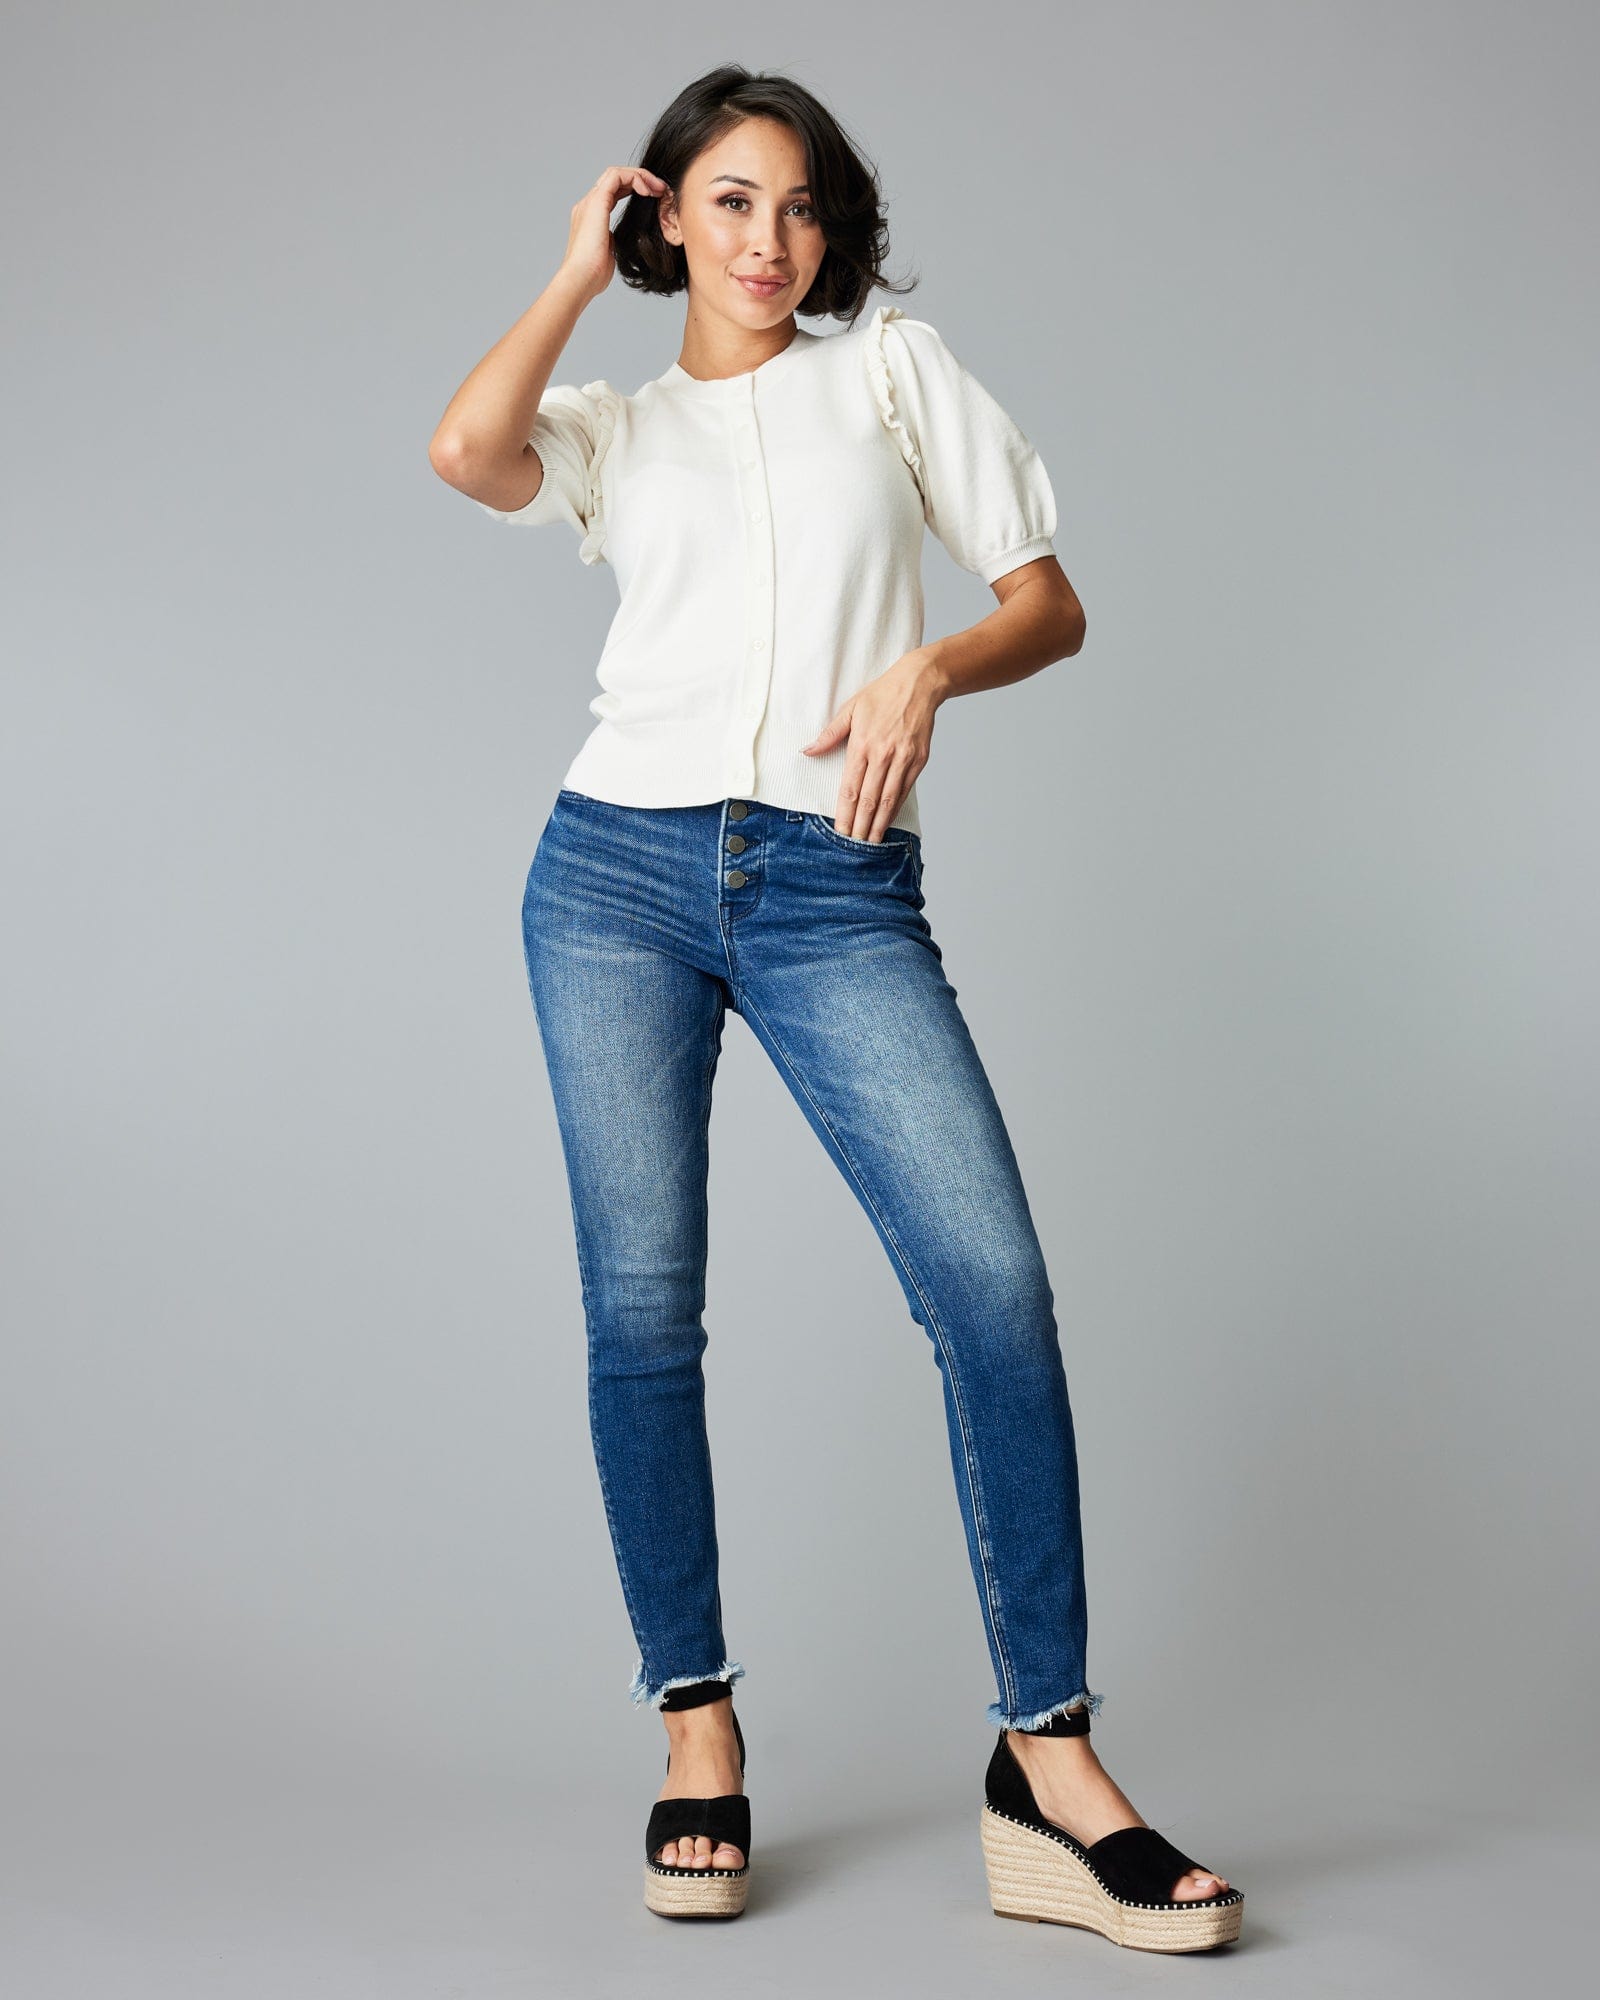 Woman in a short sleeve white cardigan.